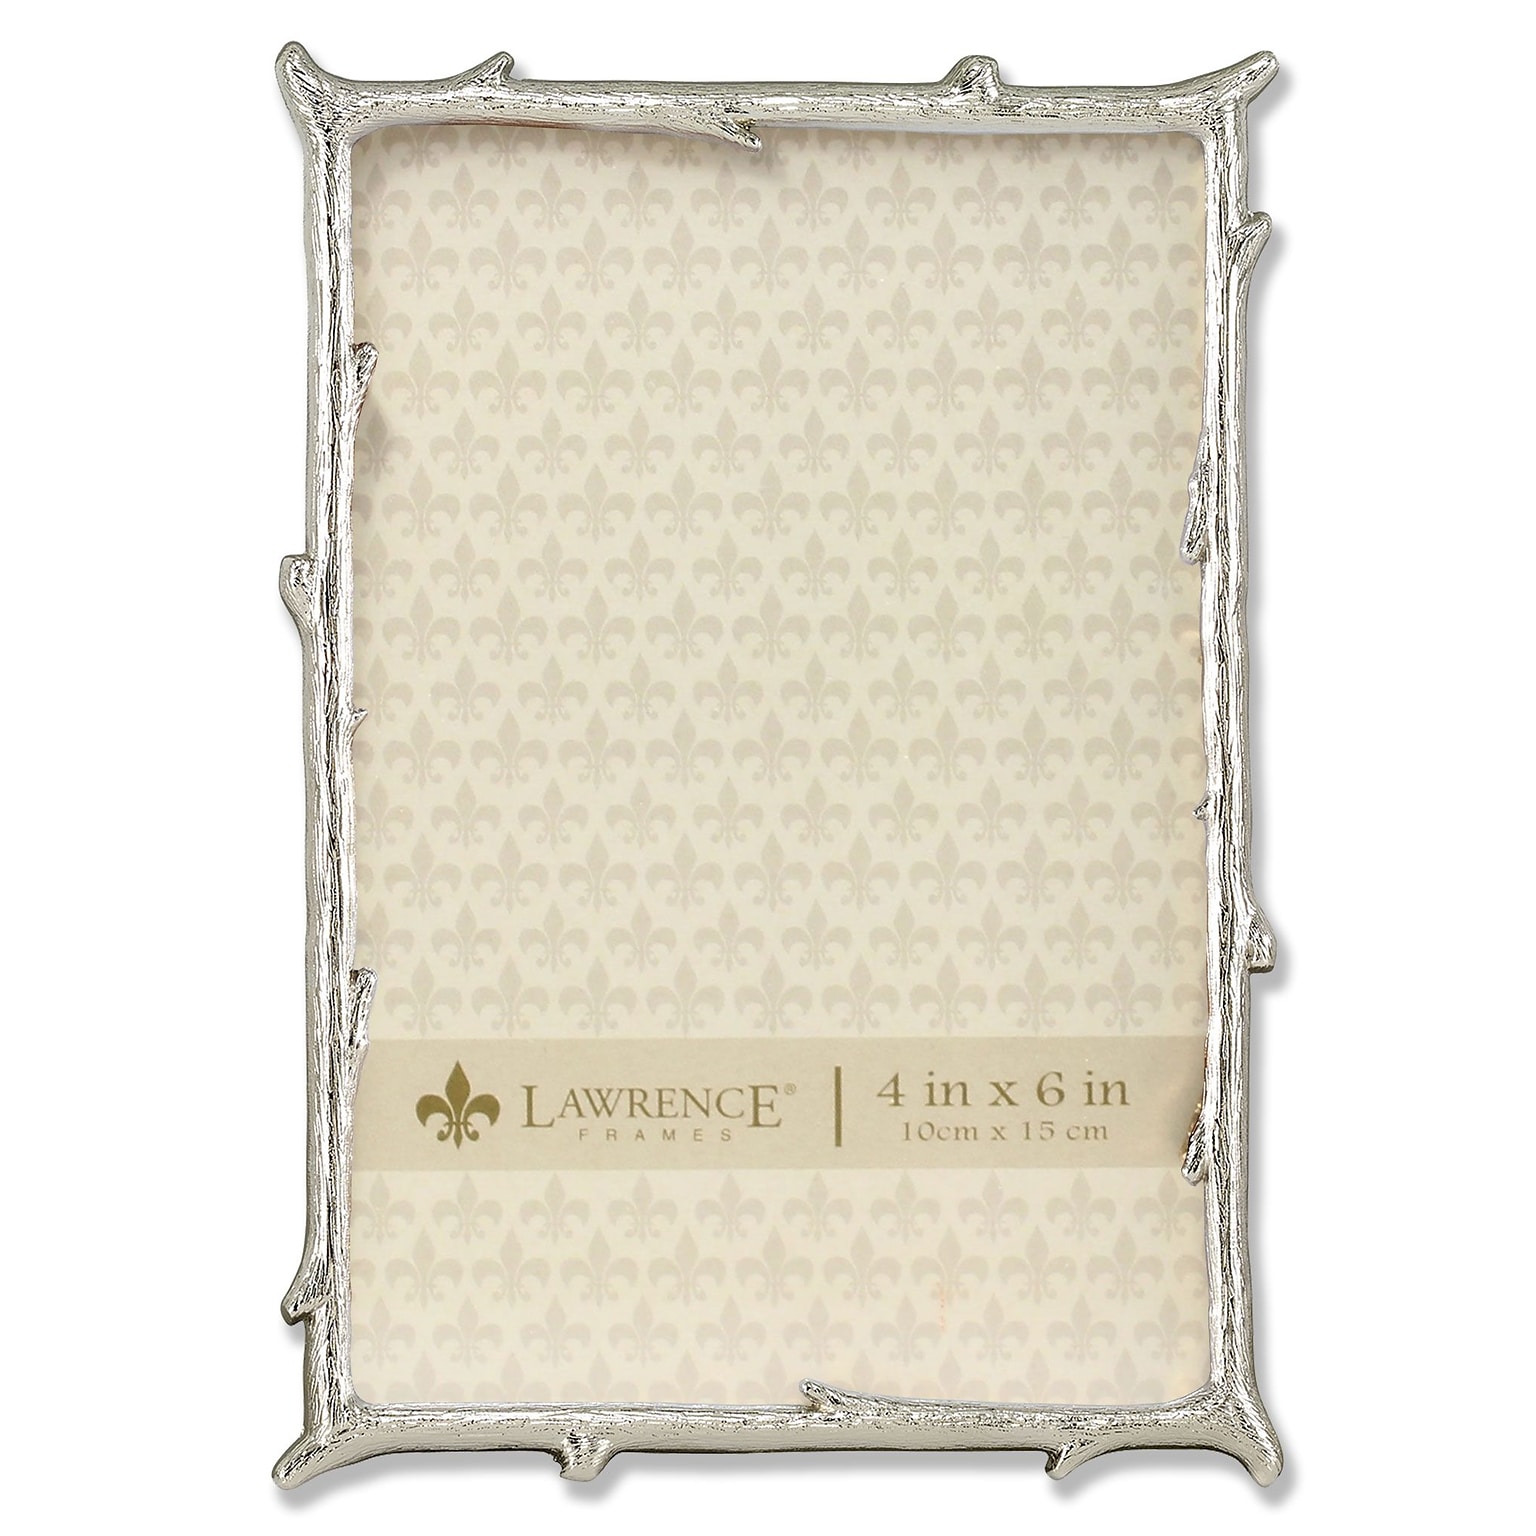 Lawrence Frames 4W x 6H Silver Metal Picture Frame with Natural Branch Design (712646)